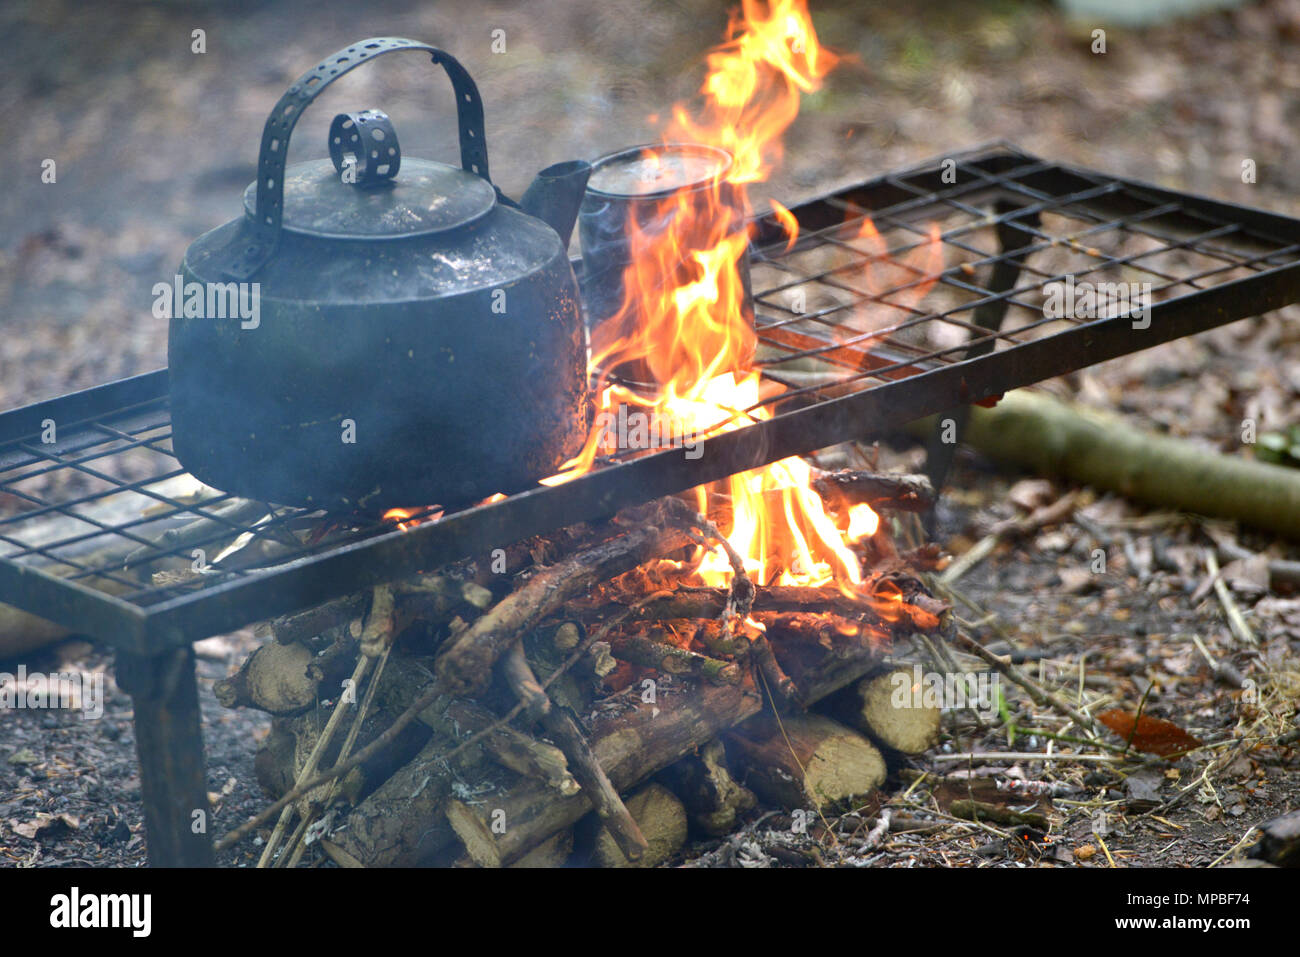 https://c8.alamy.com/comp/MPBF74/blackened-kettle-on-an-open-campfire-MPBF74.jpg